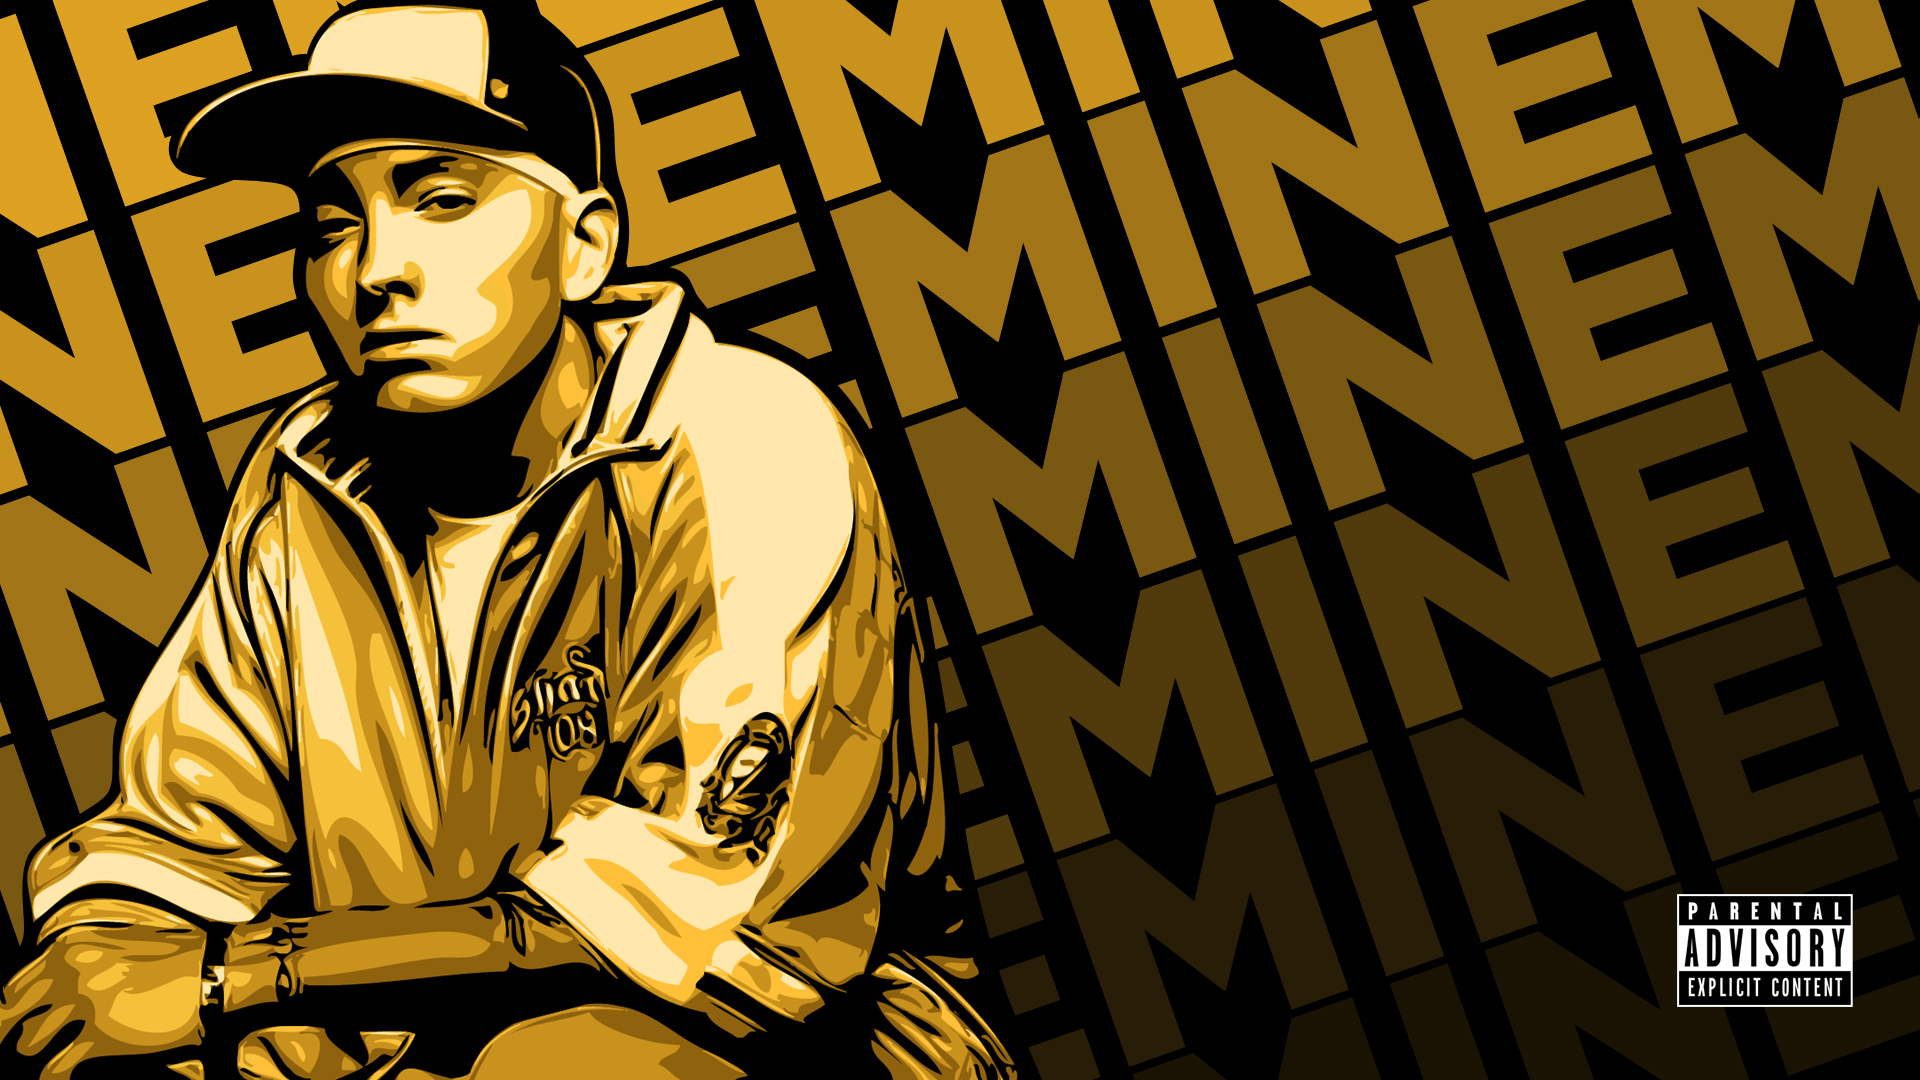 Free Download Colorful Backgrounds 28 Eminem Quality HD Wallpapers